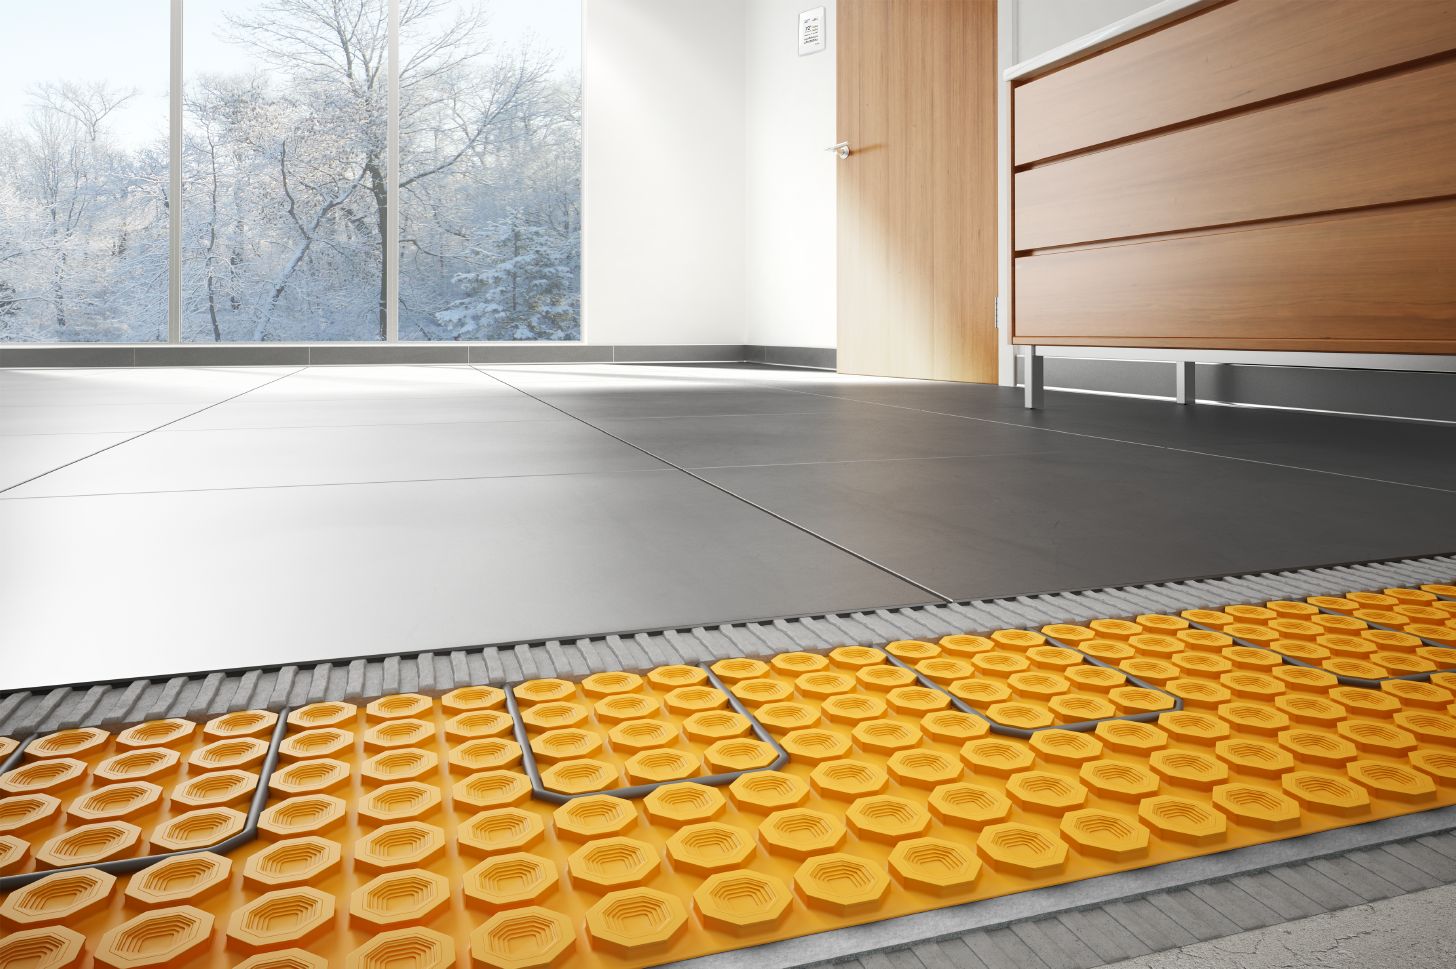 Heated Floors A Way To Make Your Kitchen Or Bathroom More Comfortable And Luxurious